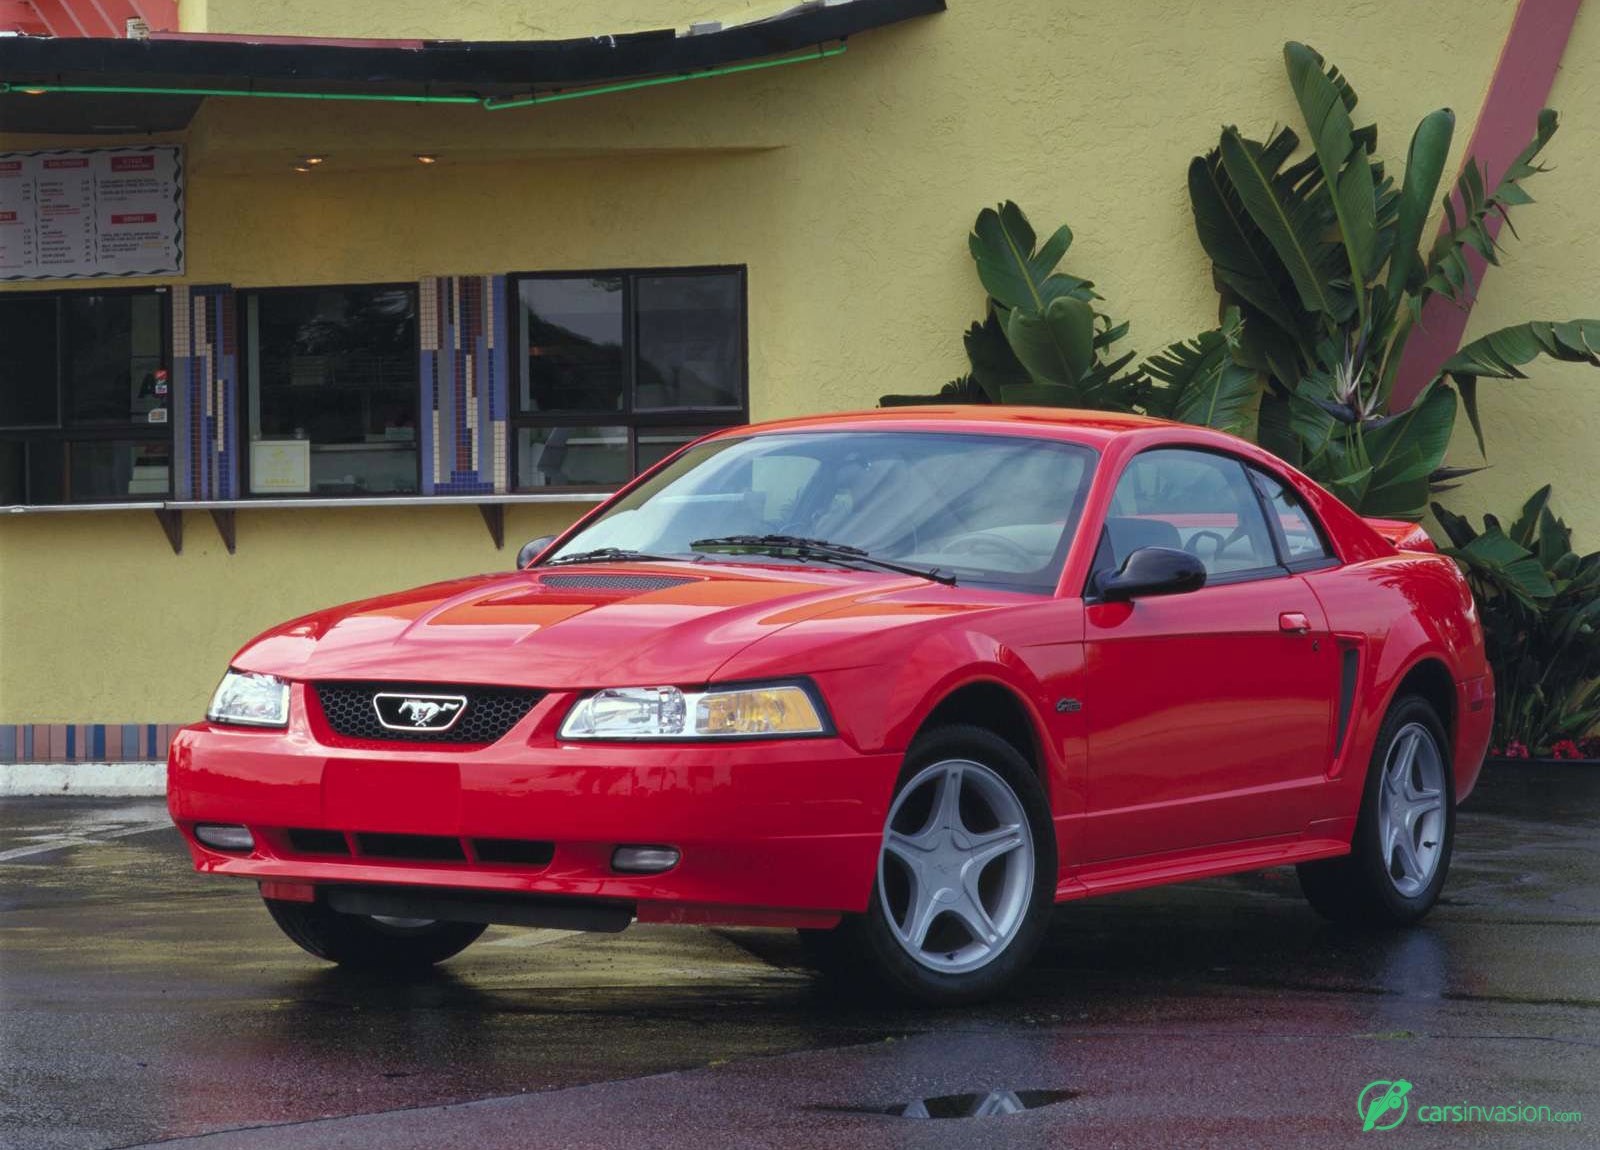 2000 Ford Mustang GT - HD Pictures @ carsinvasion.com